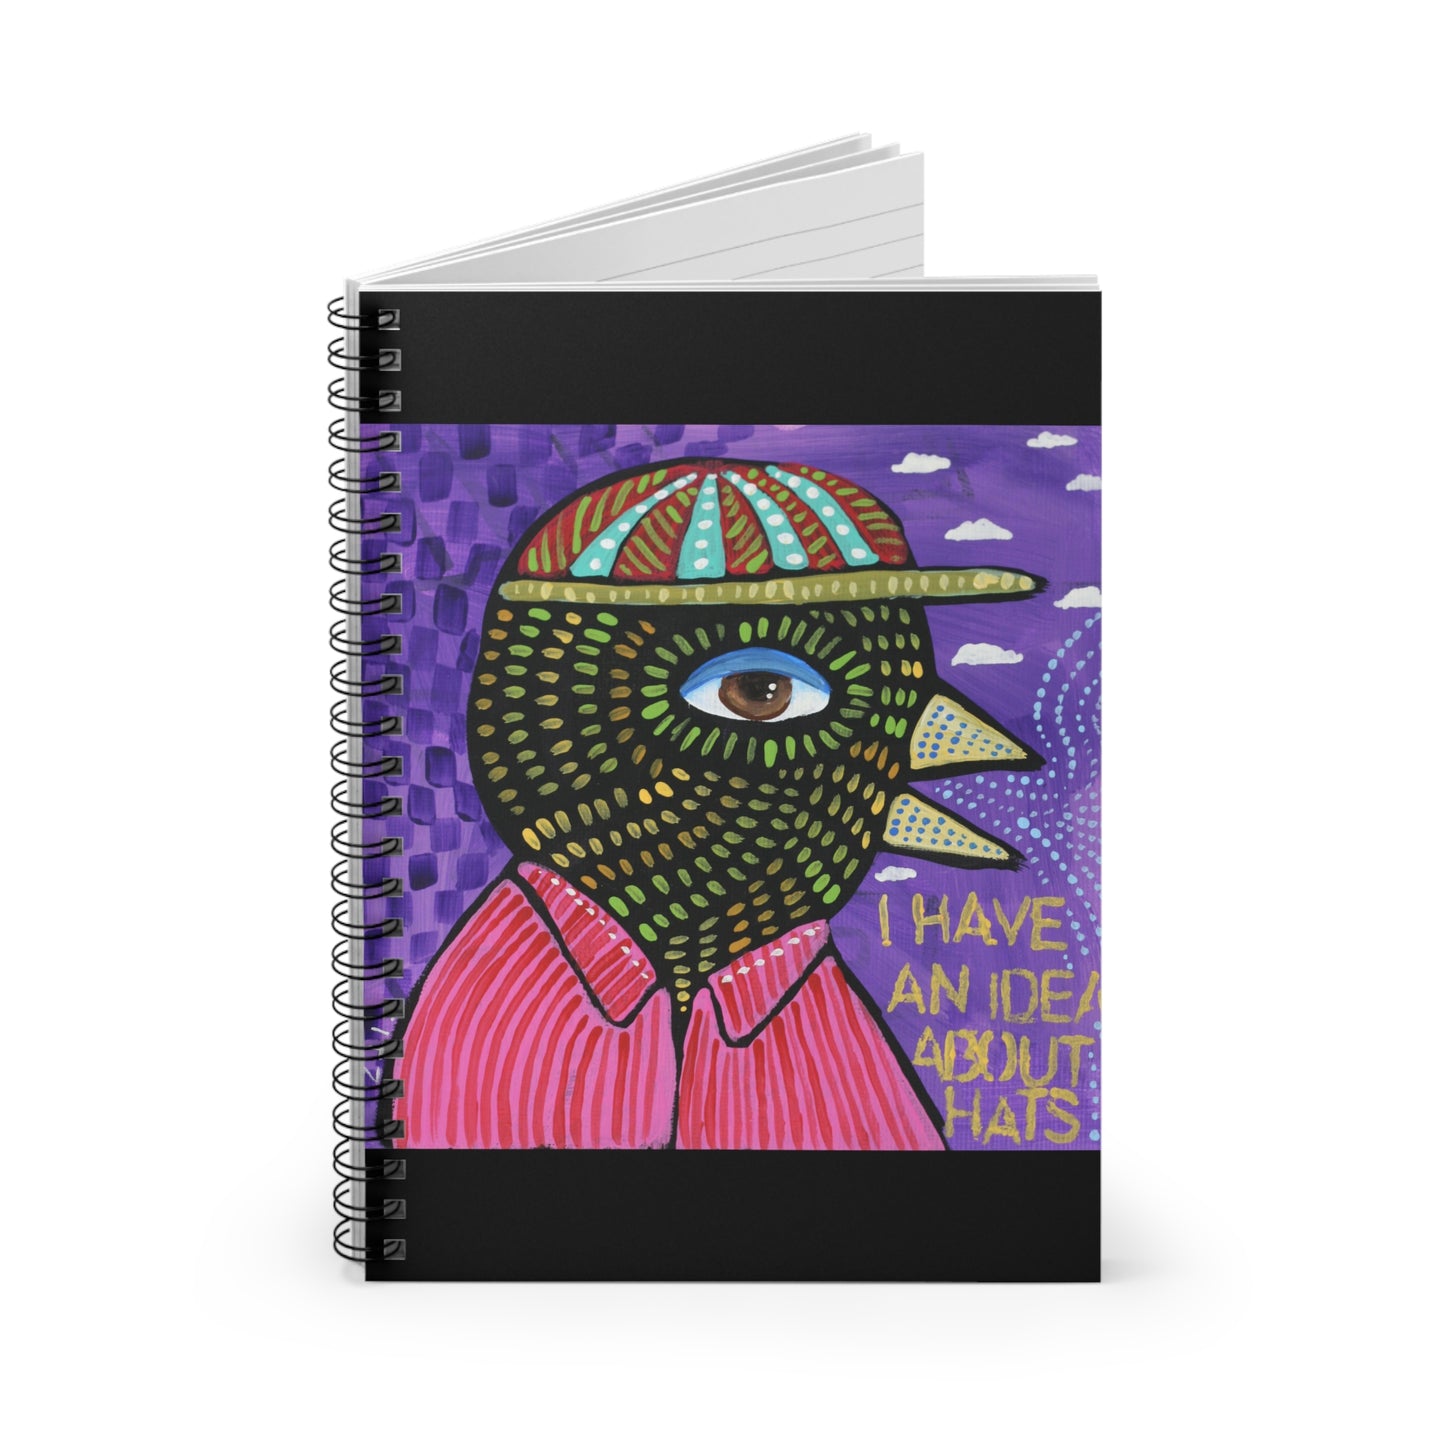 I Have An Idea About Hats Spiral Notebook